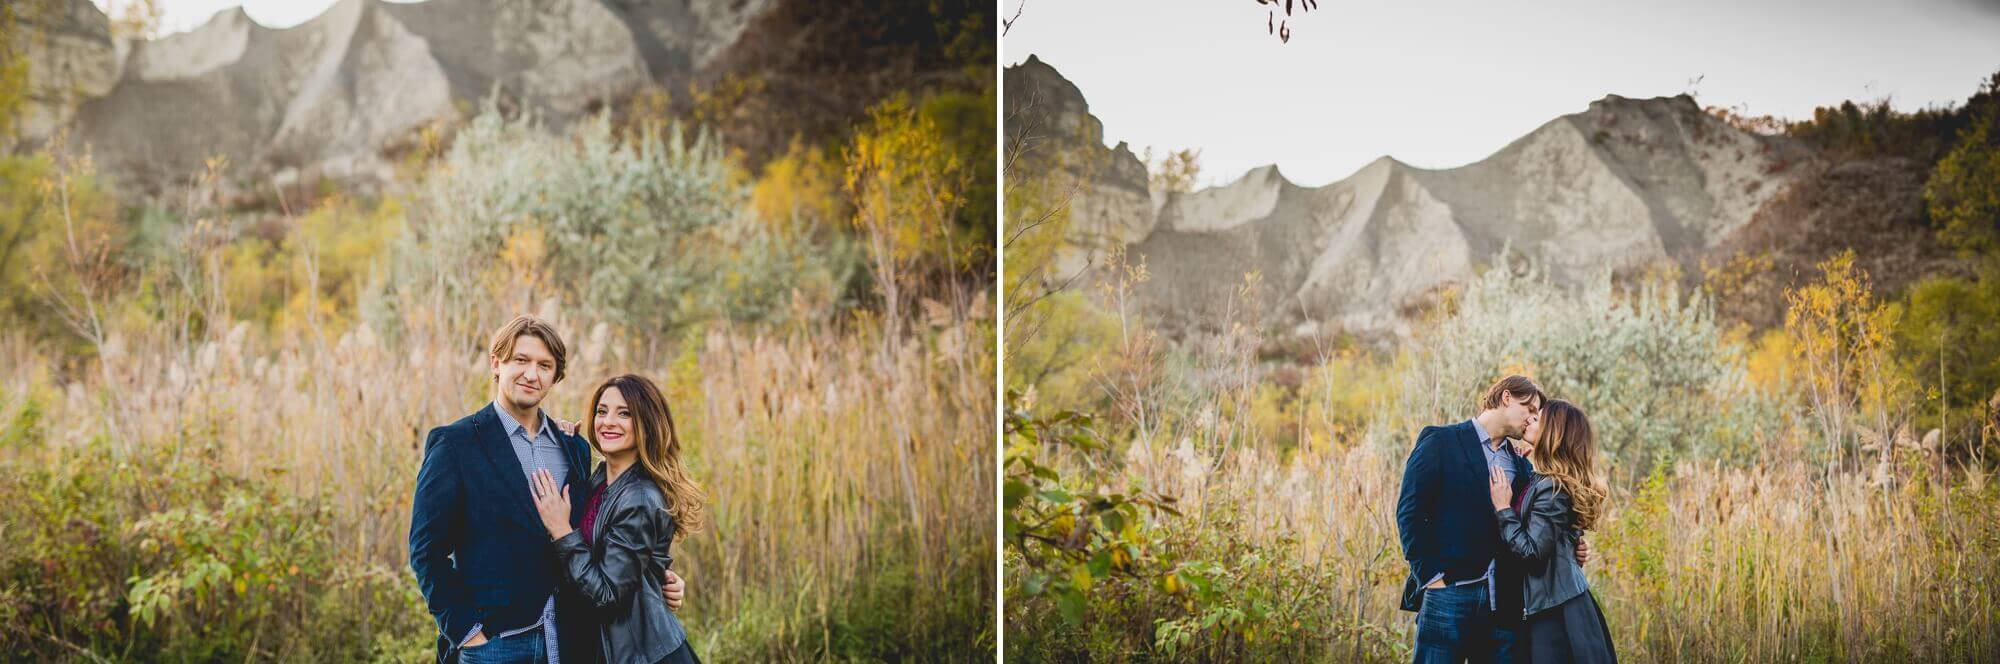 Sand dunes and field landscape for an engagement session at Scarborough Bluffs in Toronto